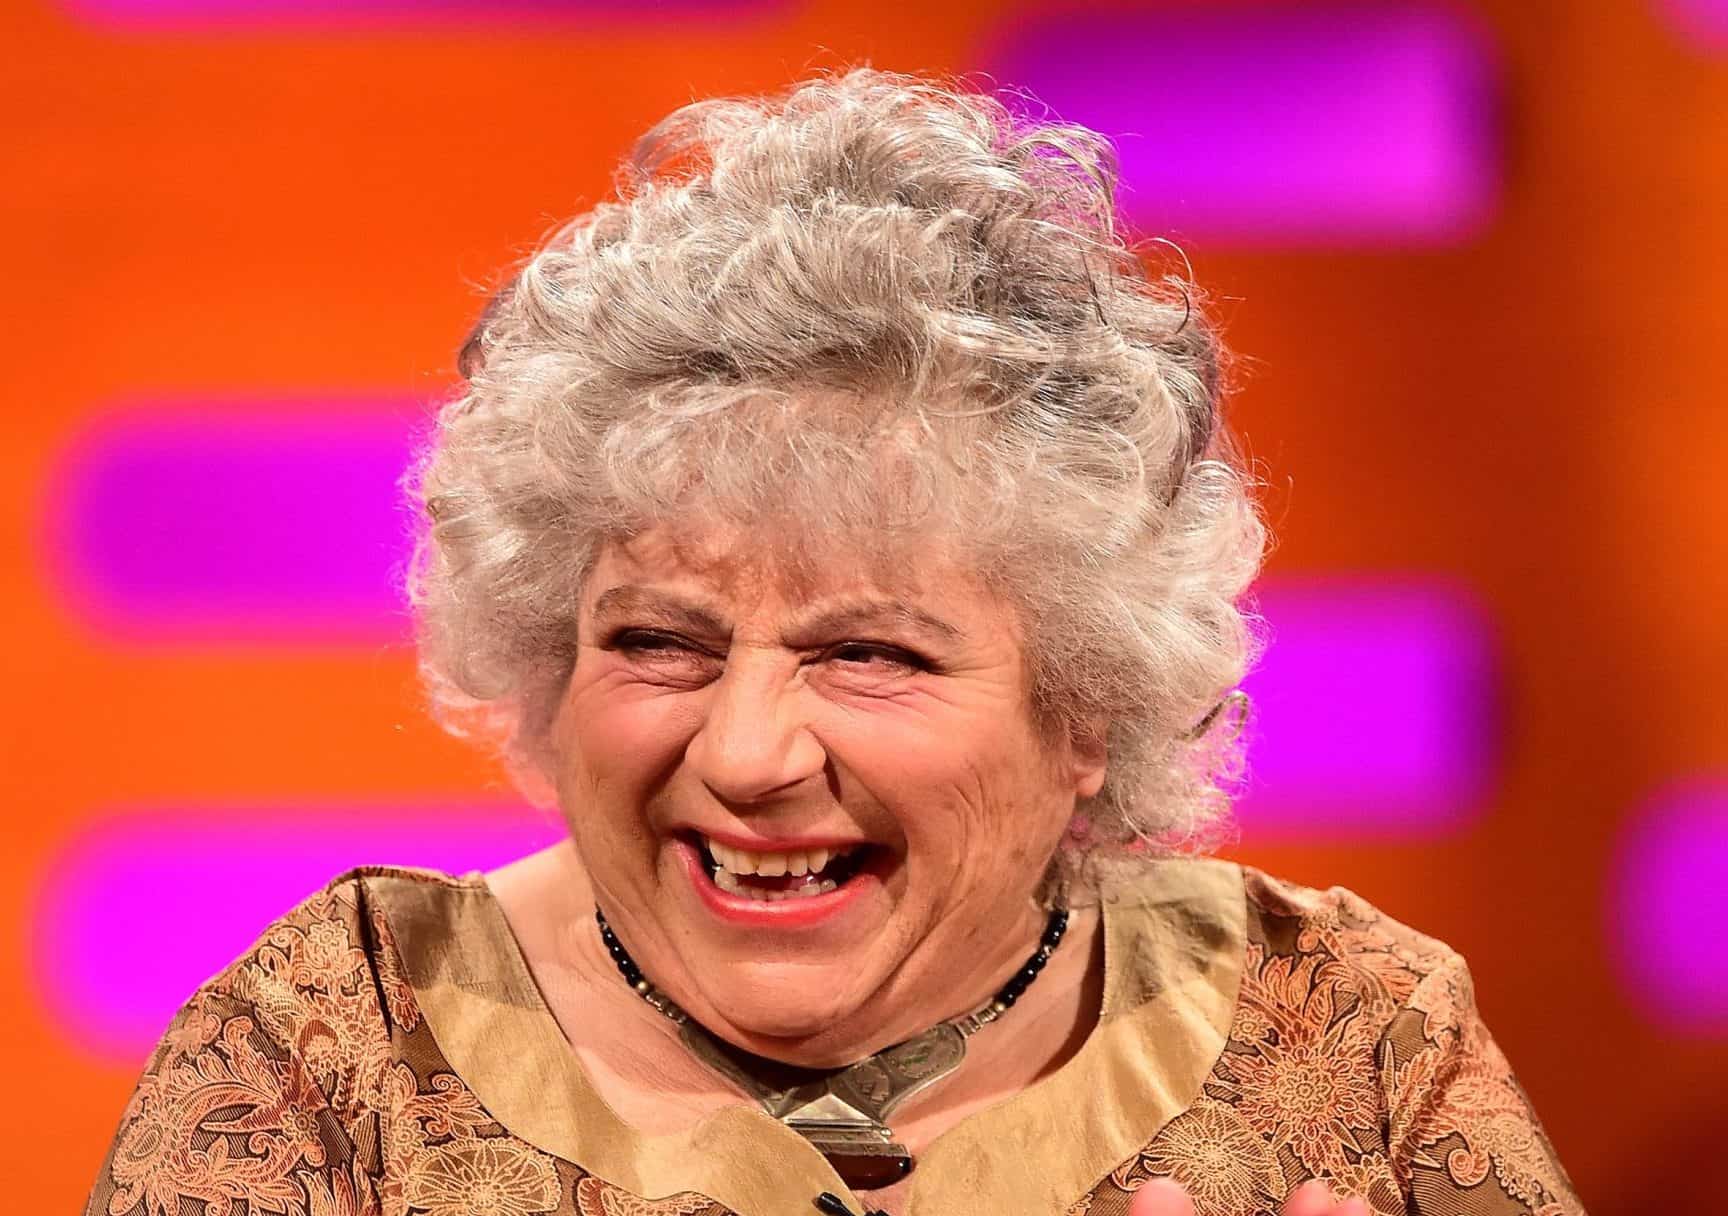 Watch: Miriam Margolyes NSFW rant on England goes viral